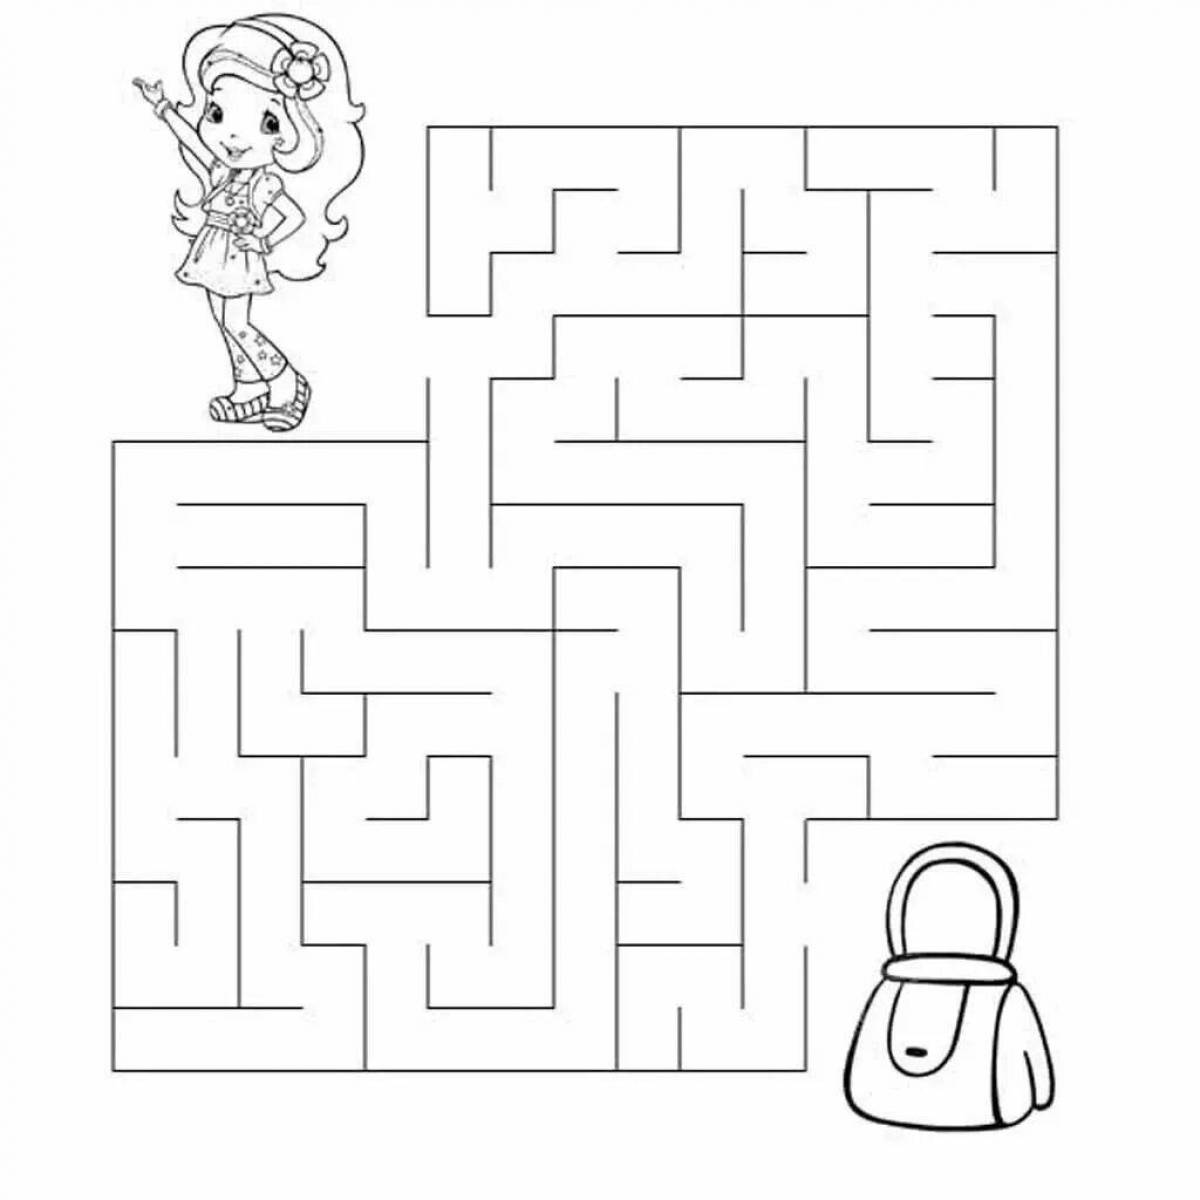 Coloring book inviting maze for children 7 years old